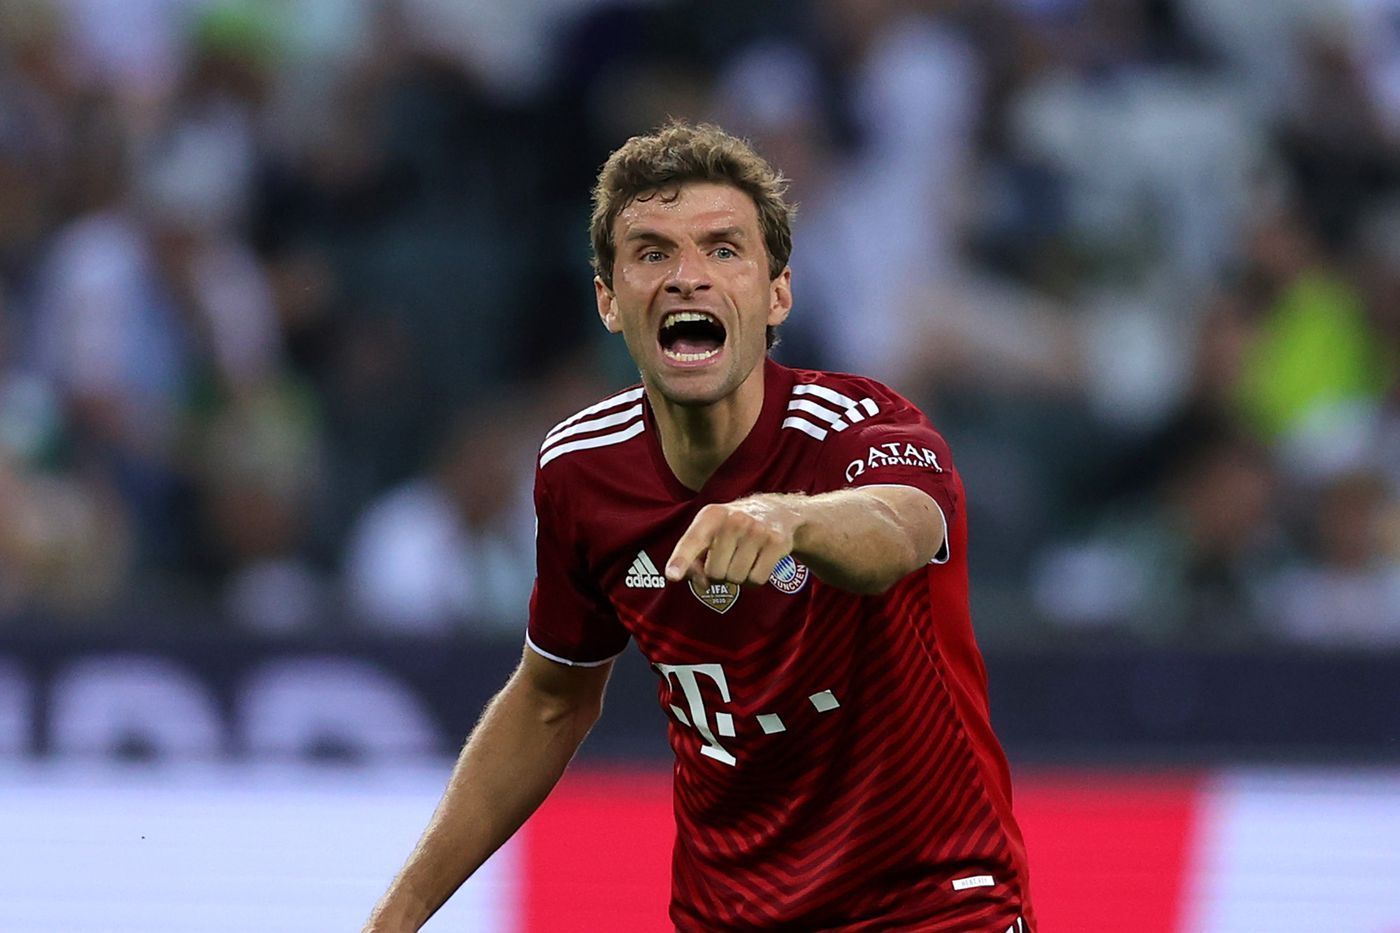 Muller bagged another assist against Dortmund